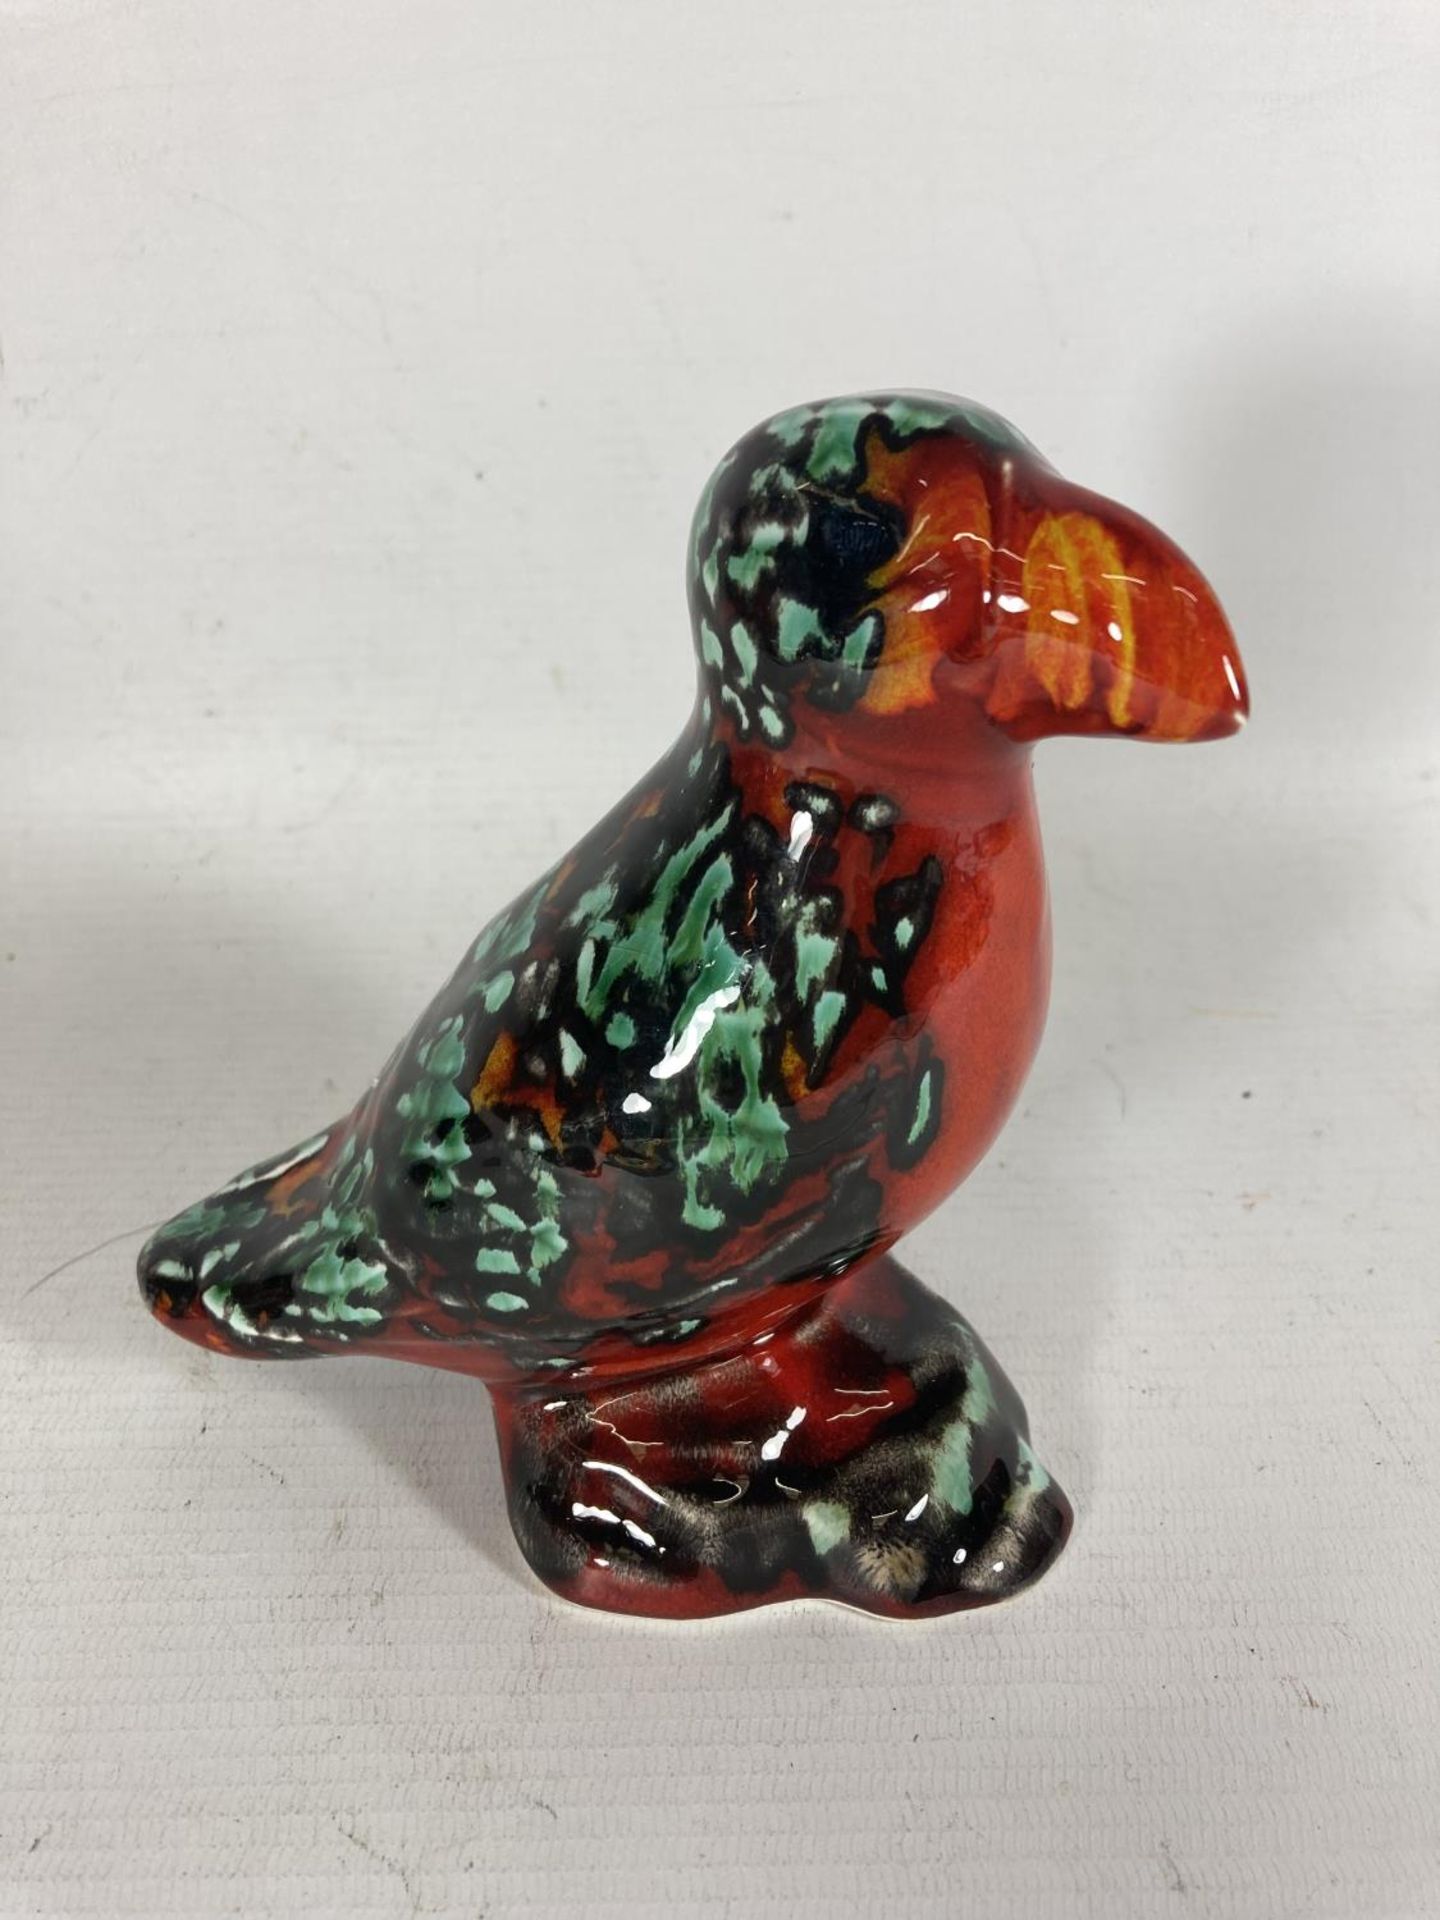 AN ANITA HARRIS PUFFIN FIGURE HAND PAINTED AND SIGNED IN GOLD